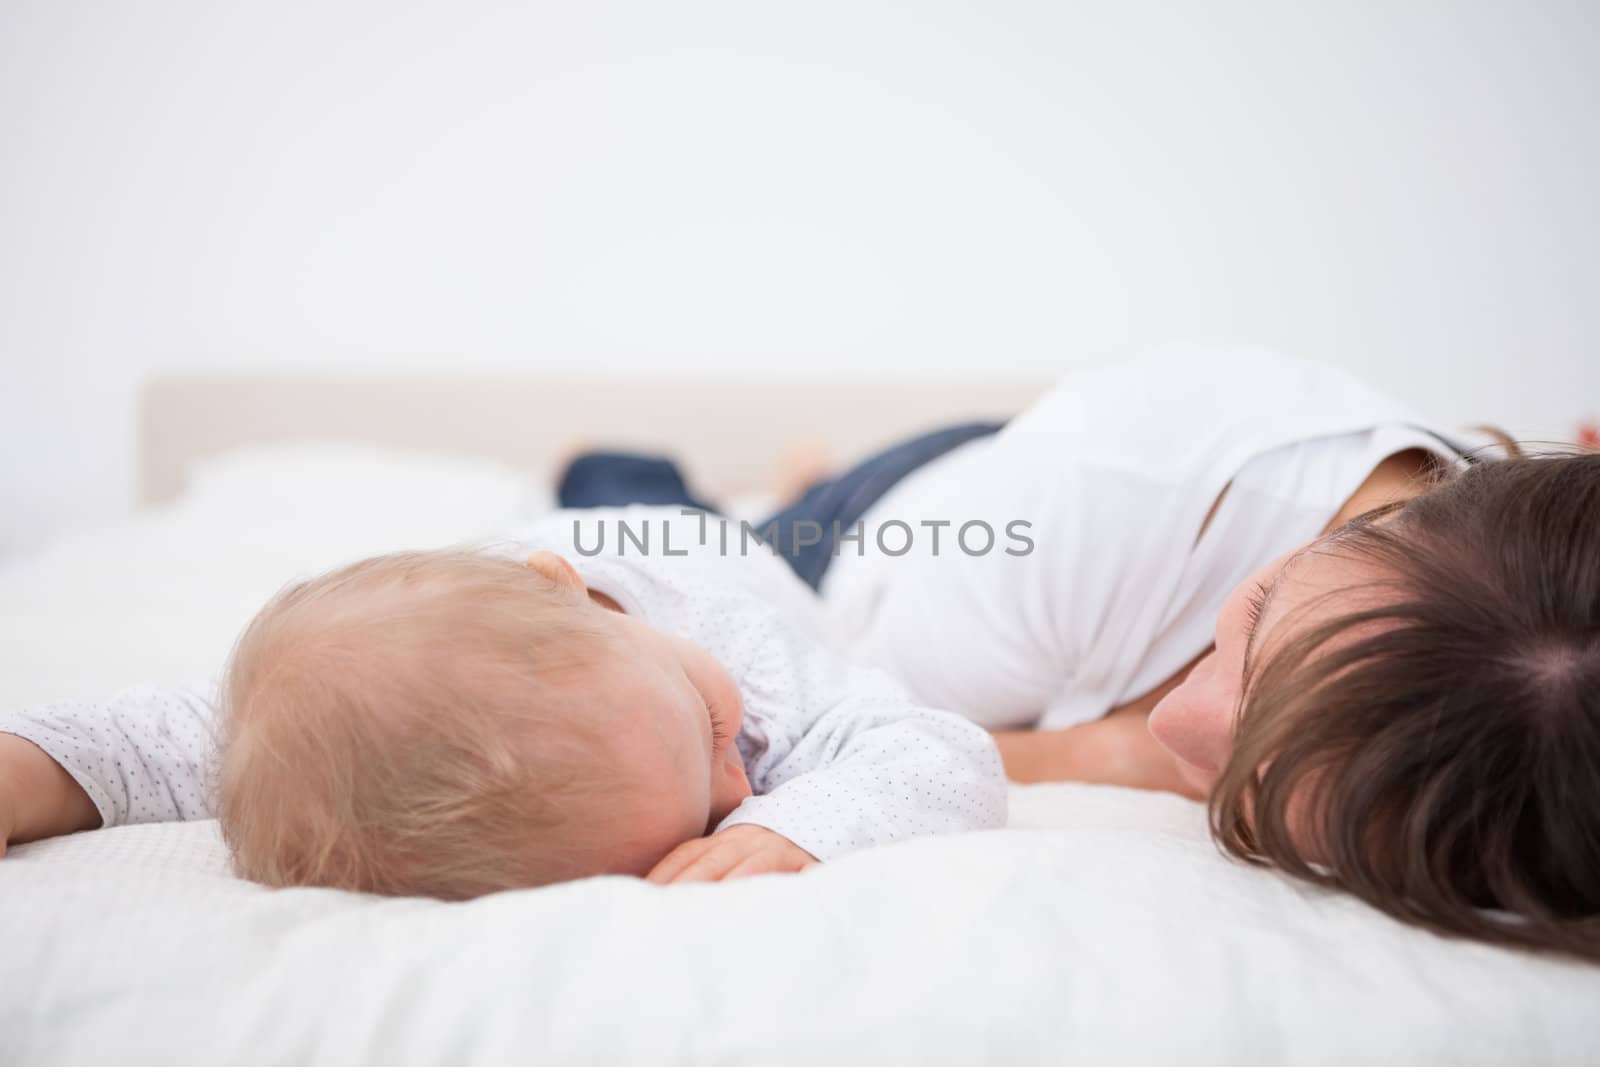 Brunette woman and her baby lying together in a bedroom